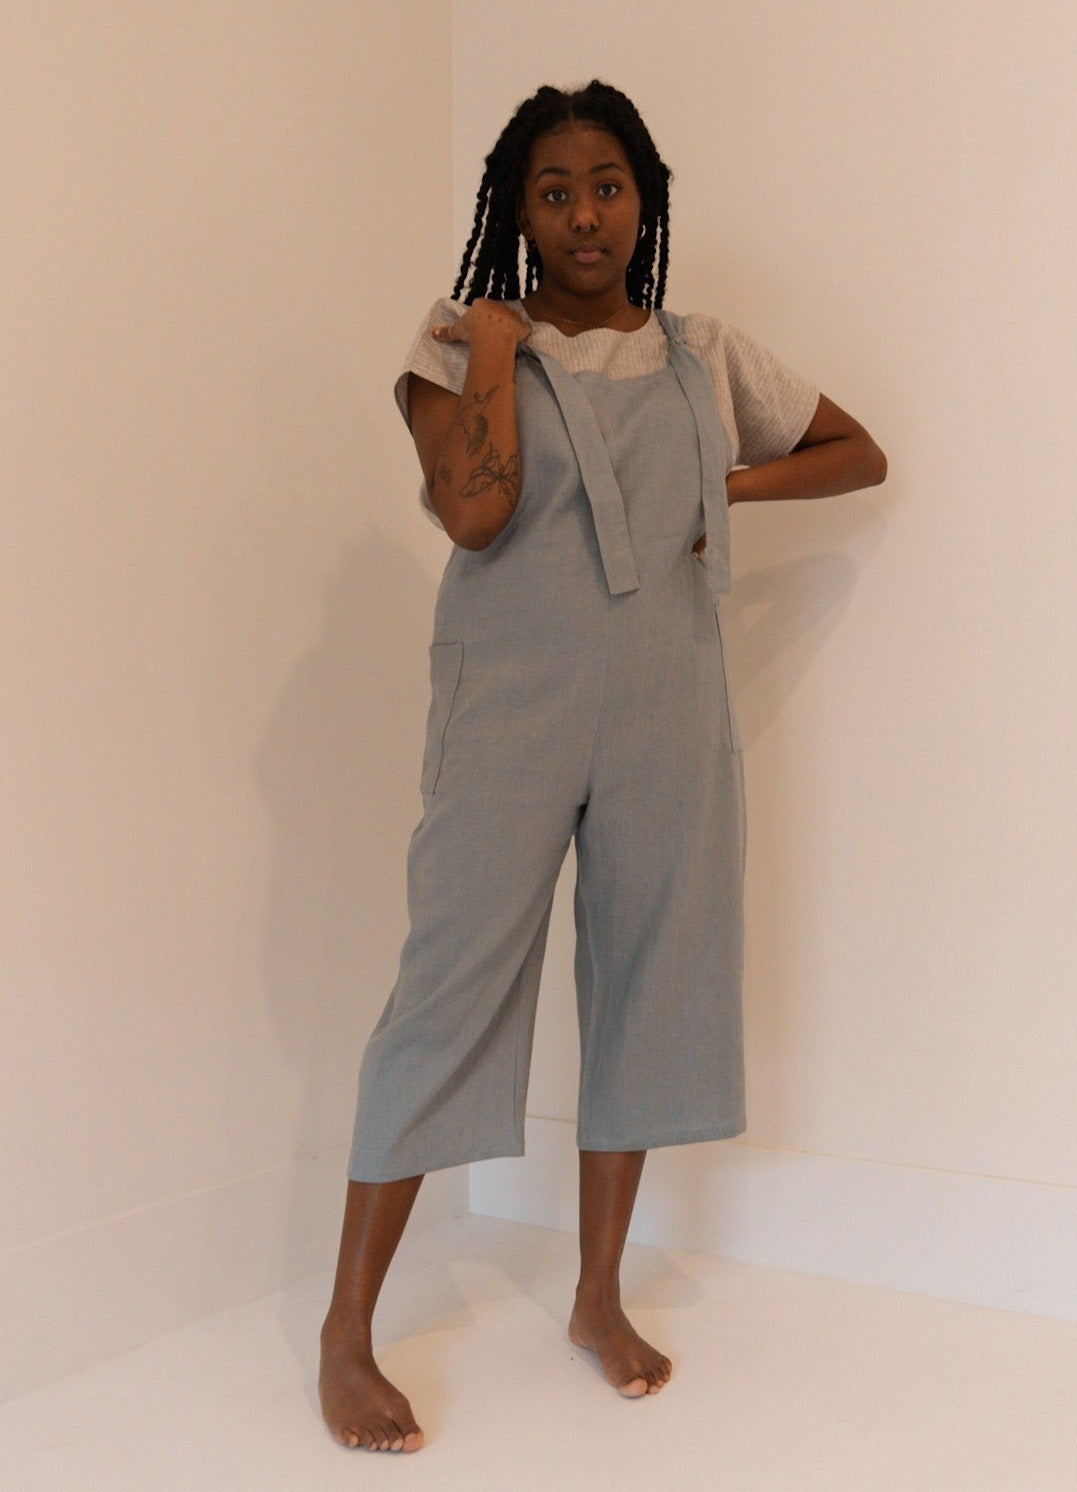 The Dungaree Pedal Pushers - Linen